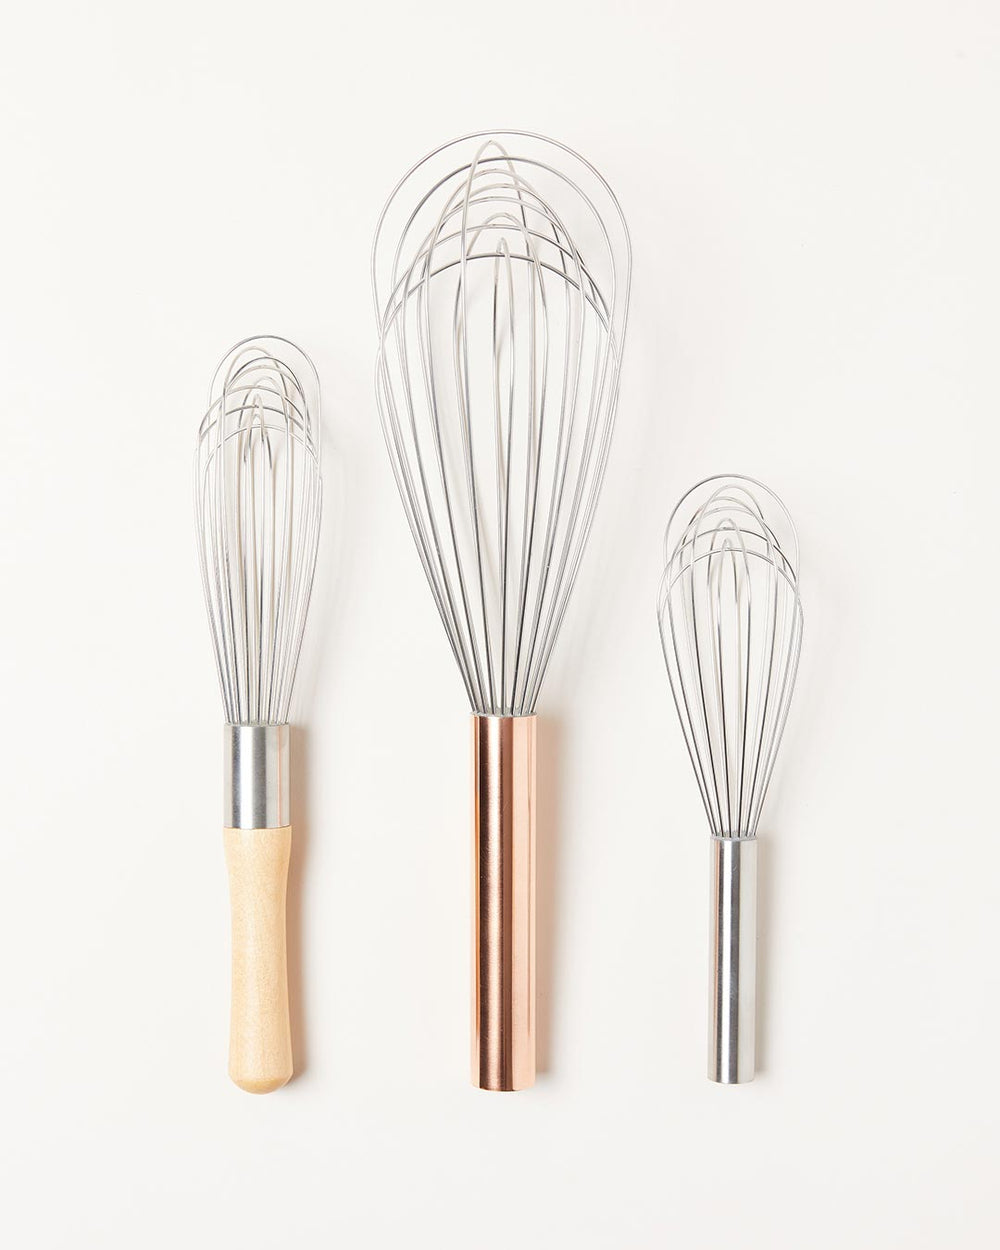 I Tried 9 Whisks and This Was the Best One